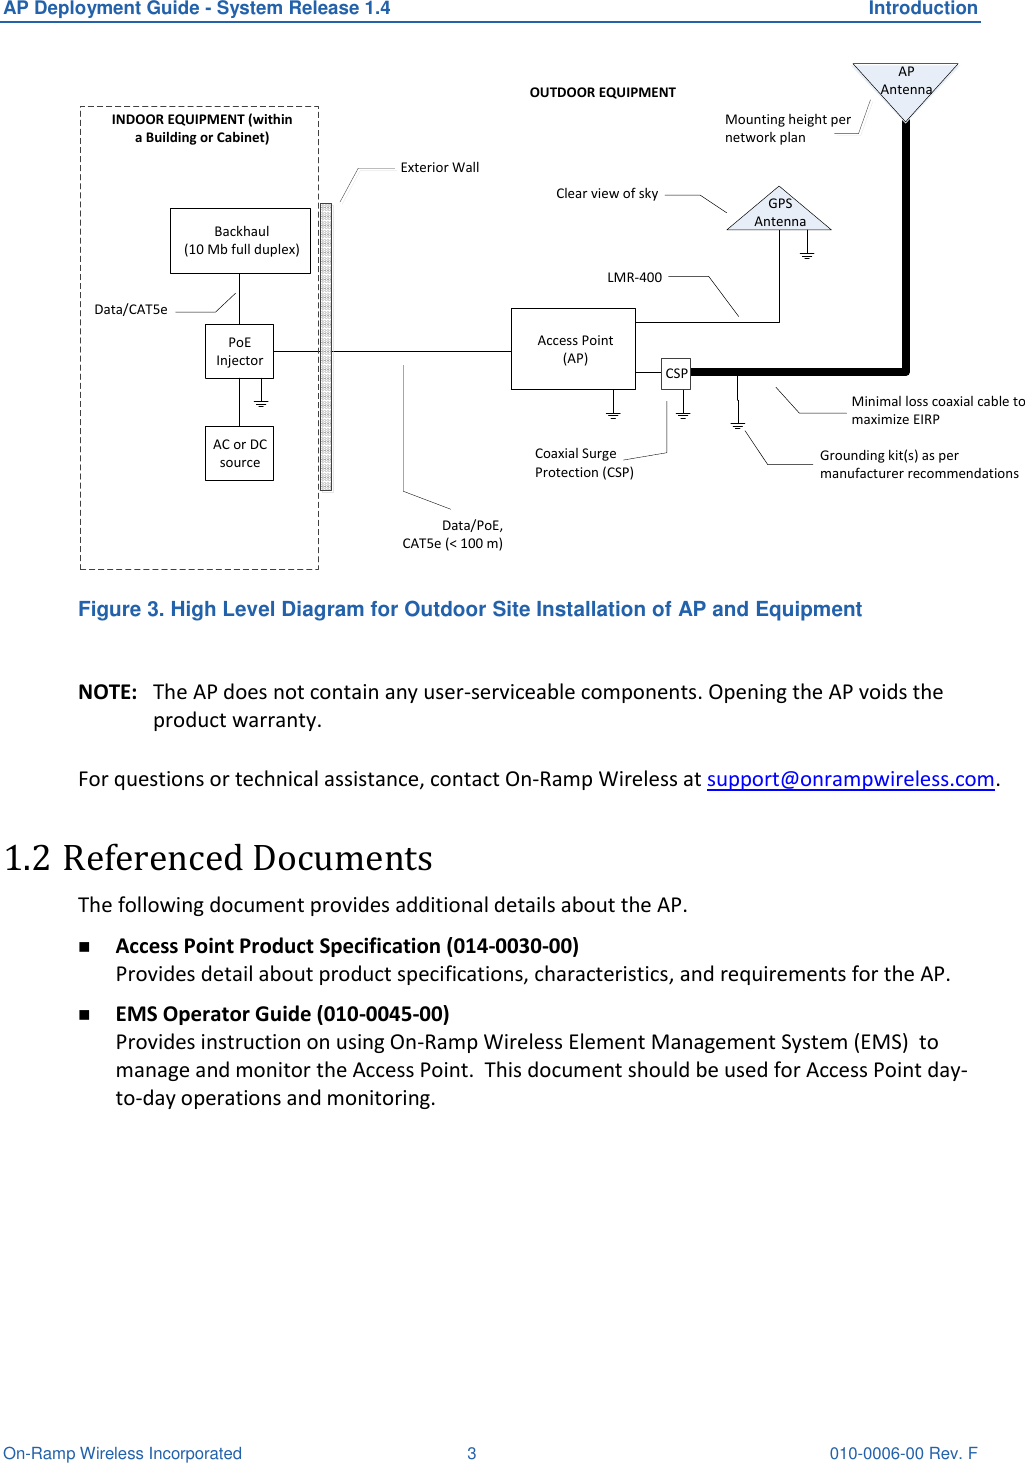 AP Deployment Guide - System Release 1.4  Introduction On-Ramp Wireless Incorporated  3  010-0006-00 Rev. F Coaxial Surge Protection (CSP)Exterior WallMinimal loss coaxial cable to maximize EIRPPoE InjectorBackhaul(10 Mb full duplex)Data/PoE, CAT5e (&lt; 100 m)Mounting height per network plan LMR-400Grounding kit(s) as per manufacturer recommendationsData/CAT5eCSPClear view of sky GPS AntennaAP AntennaAC or DC sourceAccess Point(AP)INDOOR EQUIPMENT (within a Building or Cabinet)OUTDOOR EQUIPMENT Figure 3. High Level Diagram for Outdoor Site Installation of AP and Equipment  NOTE:  The AP does not contain any user-serviceable components. Opening the AP voids the product warranty.   For questions or technical assistance, contact On-Ramp Wireless at support@onrampwireless.com.  1.2 Referenced Documents The following document provides additional details about the AP.  Access Point Product Specification (014-0030-00)  Provides detail about product specifications, characteristics, and requirements for the AP.  EMS Operator Guide (010-0045-00) Provides instruction on using On-Ramp Wireless Element Management System (EMS)  to manage and monitor the Access Point.  This document should be used for Access Point day-to-day operations and monitoring.   